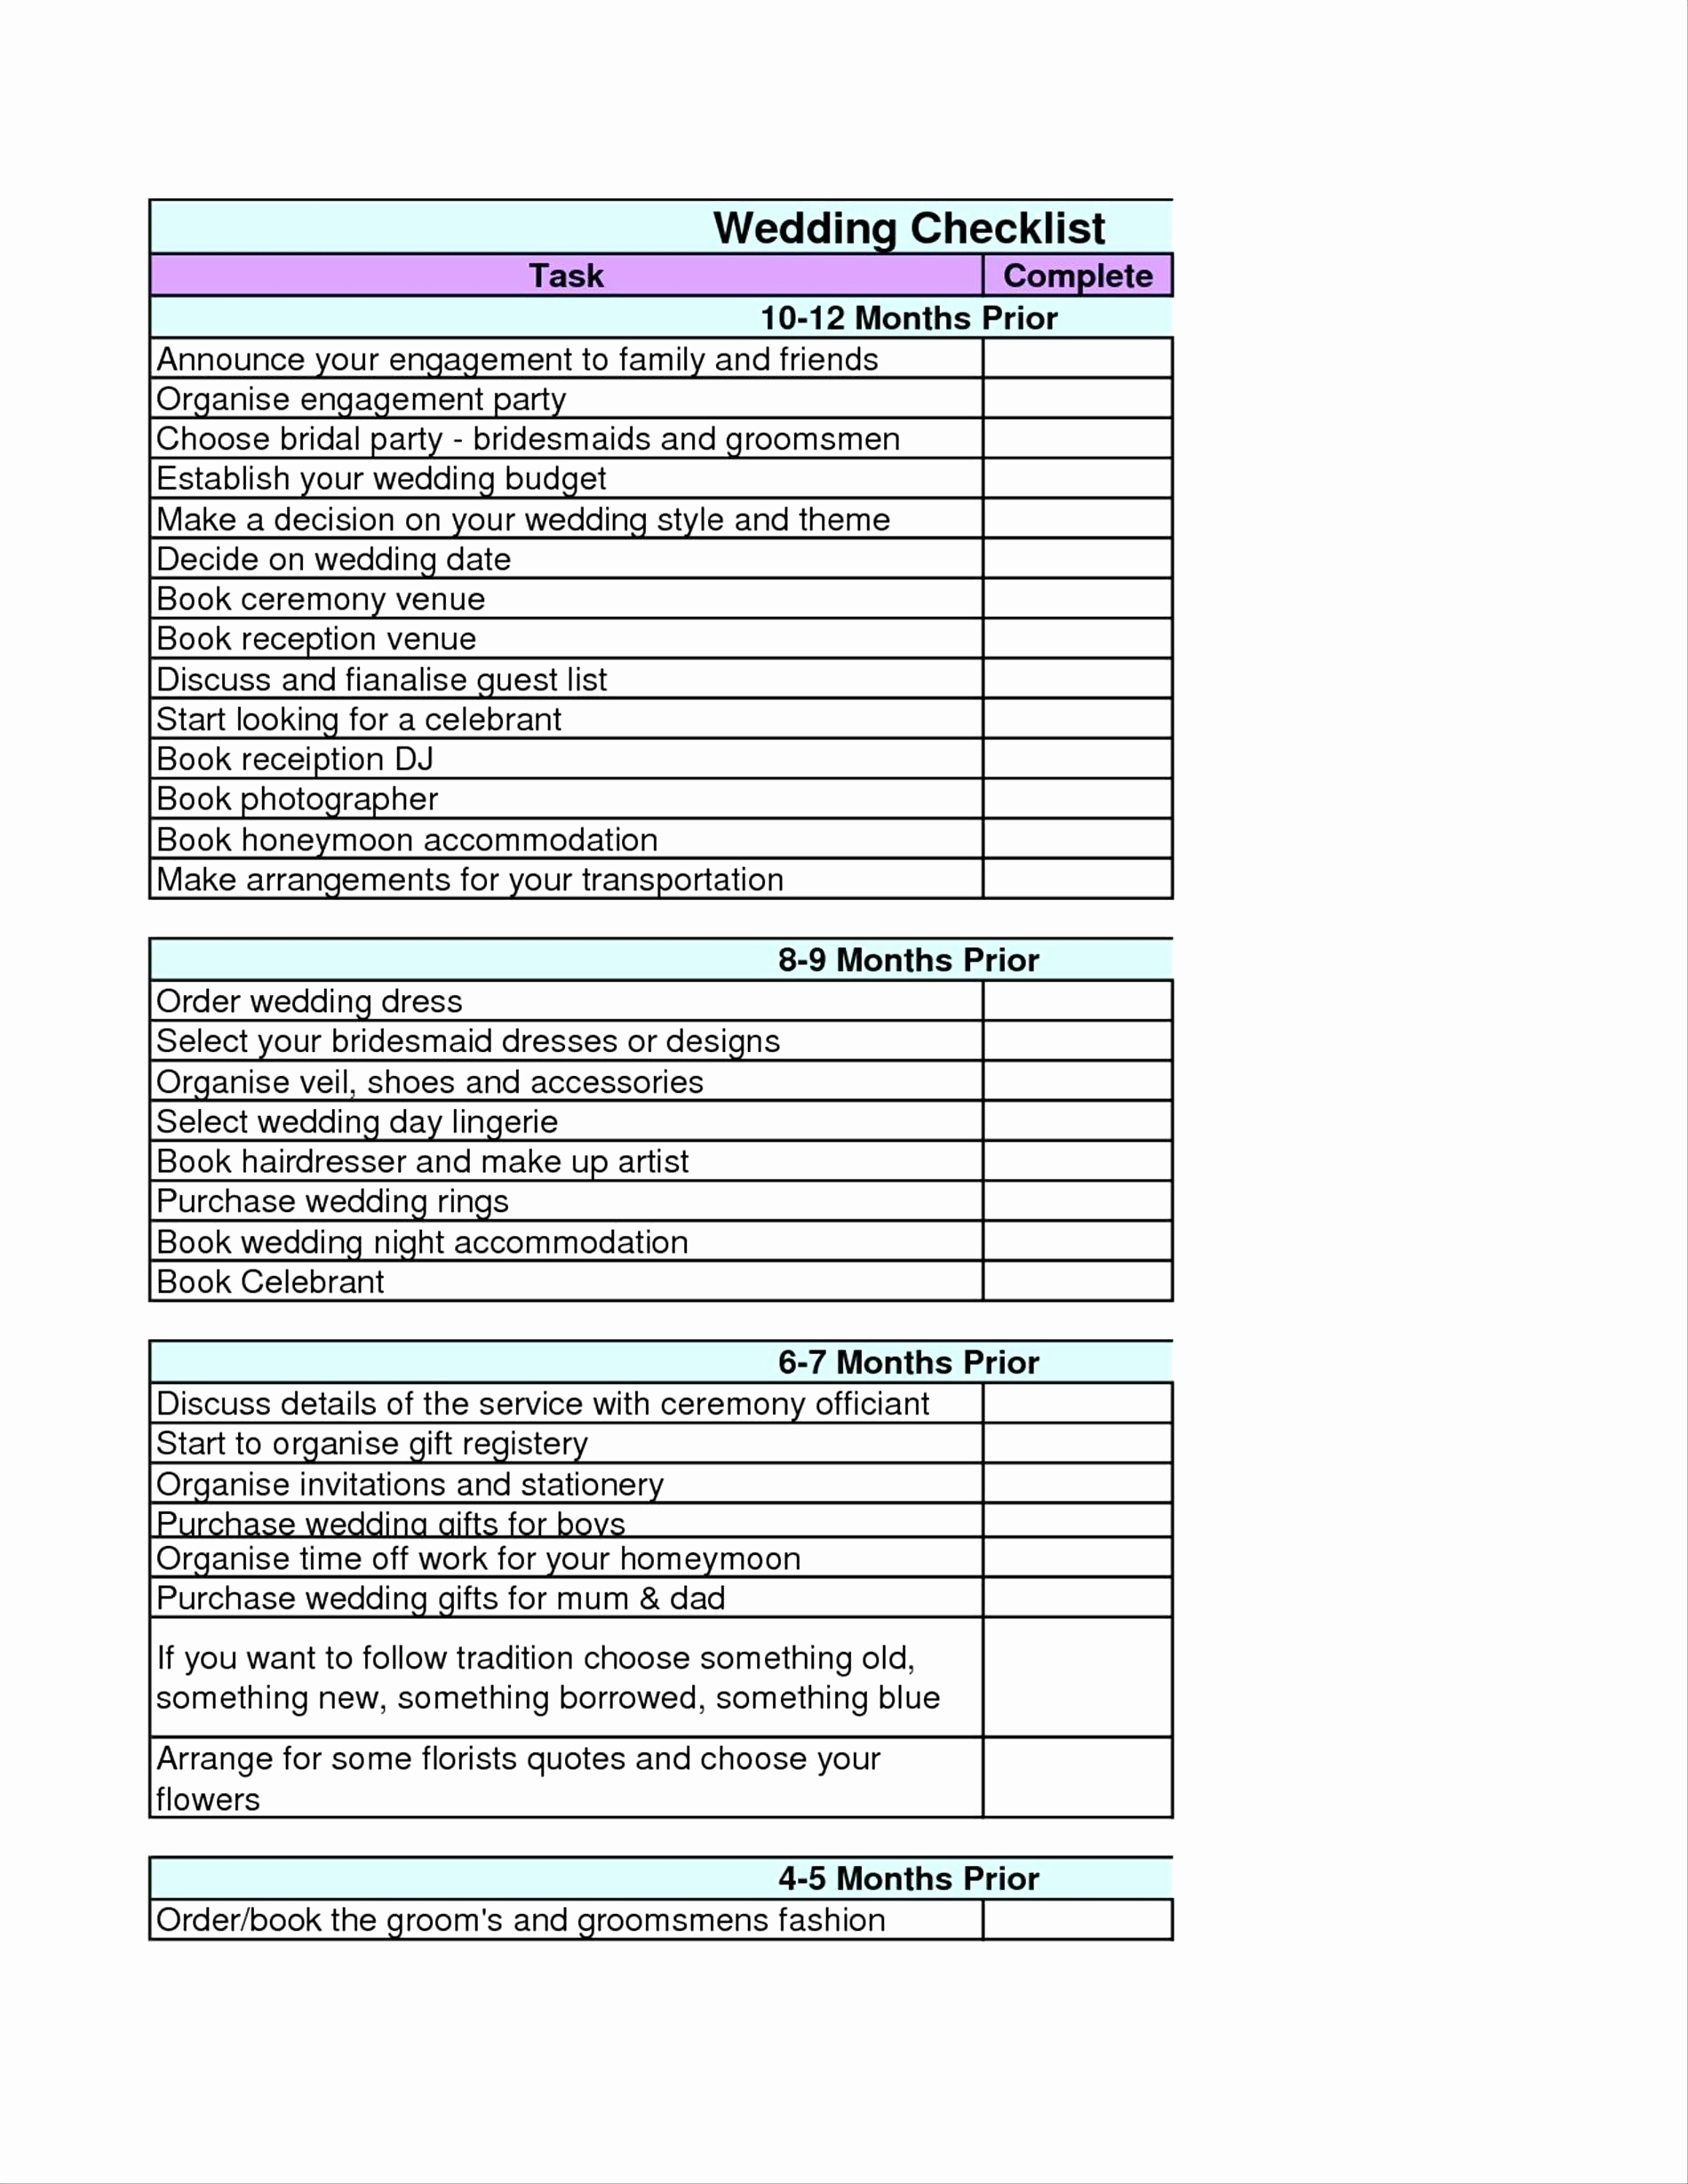 Indian Wedding Checklist Excel Spreadsheet Within Wedding Budget Excel Sheet Download Document Spreadsheet India File